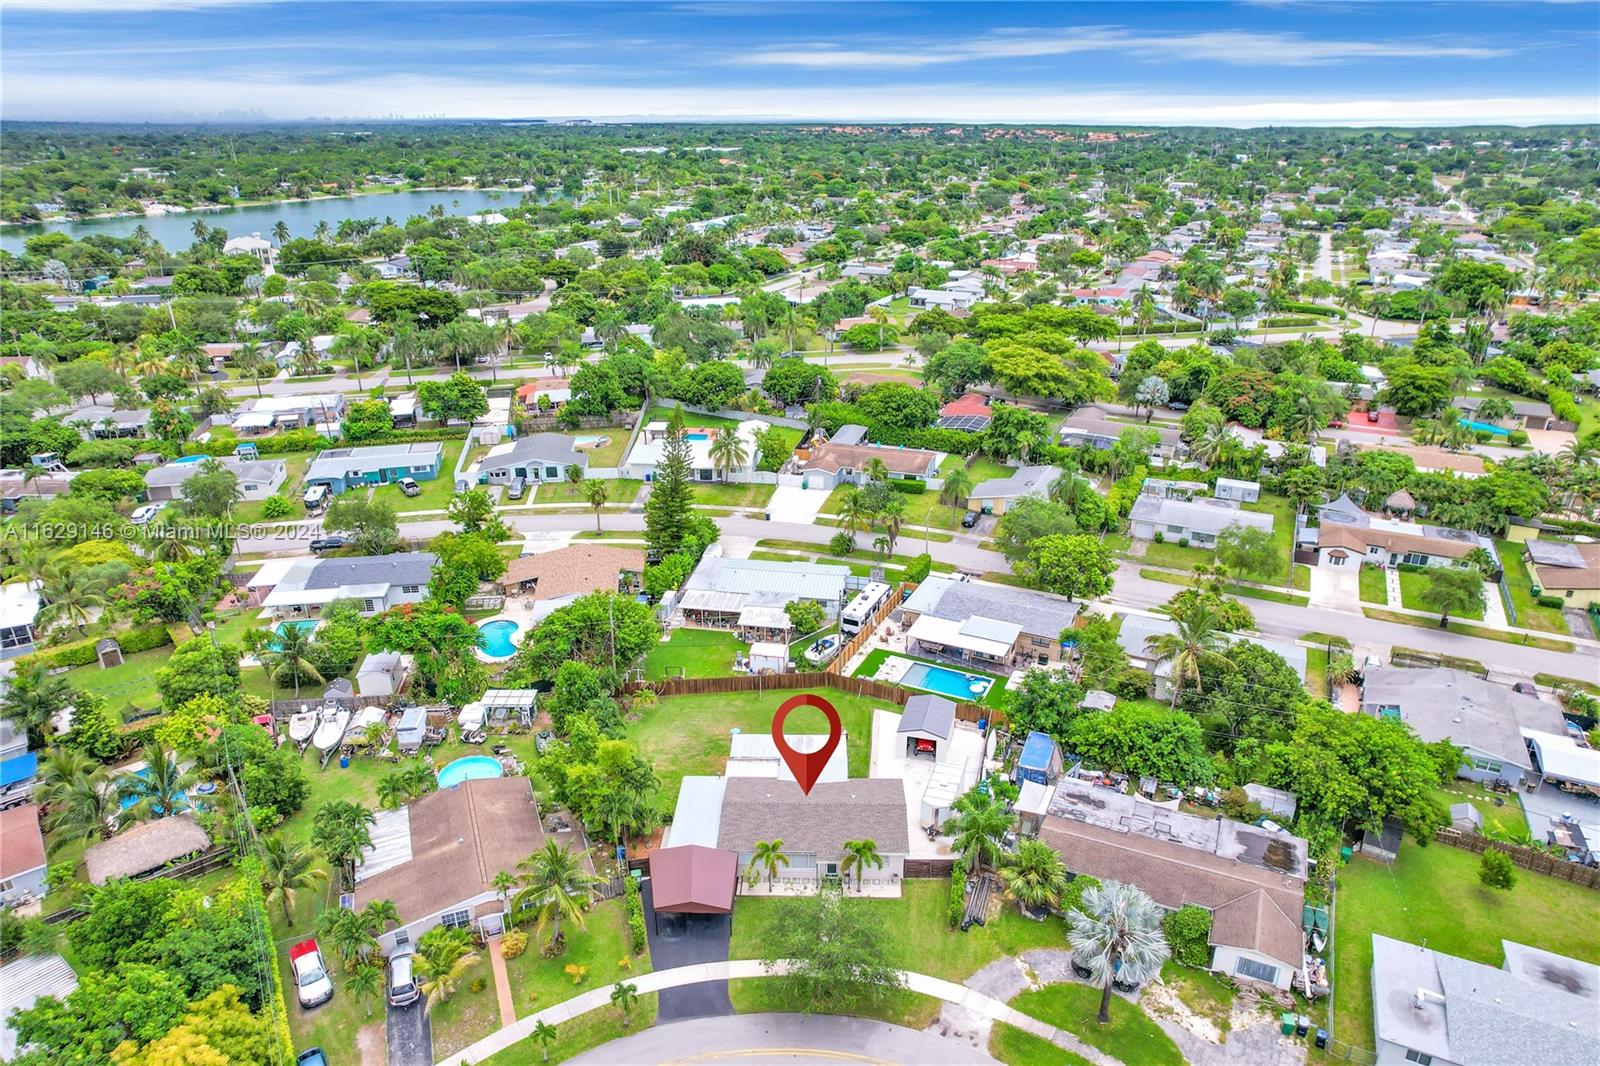 Discover your ideal family home in Cutler Bay! This meticulously remodeled residence is set on a generous 10,000+ square foot lot, complete with a detached garage and every modern convenience. With no expense spared, this home is move-in ready, offering seamless access to the Turnpike, entertainment, and the new luxury mall and exotic car dealerships just minutes away. Enjoy the convenience of Pinecrest, the Keys, and Black Point Marina nearby, making this property the epitome of suburban comfort and urban accessibility.